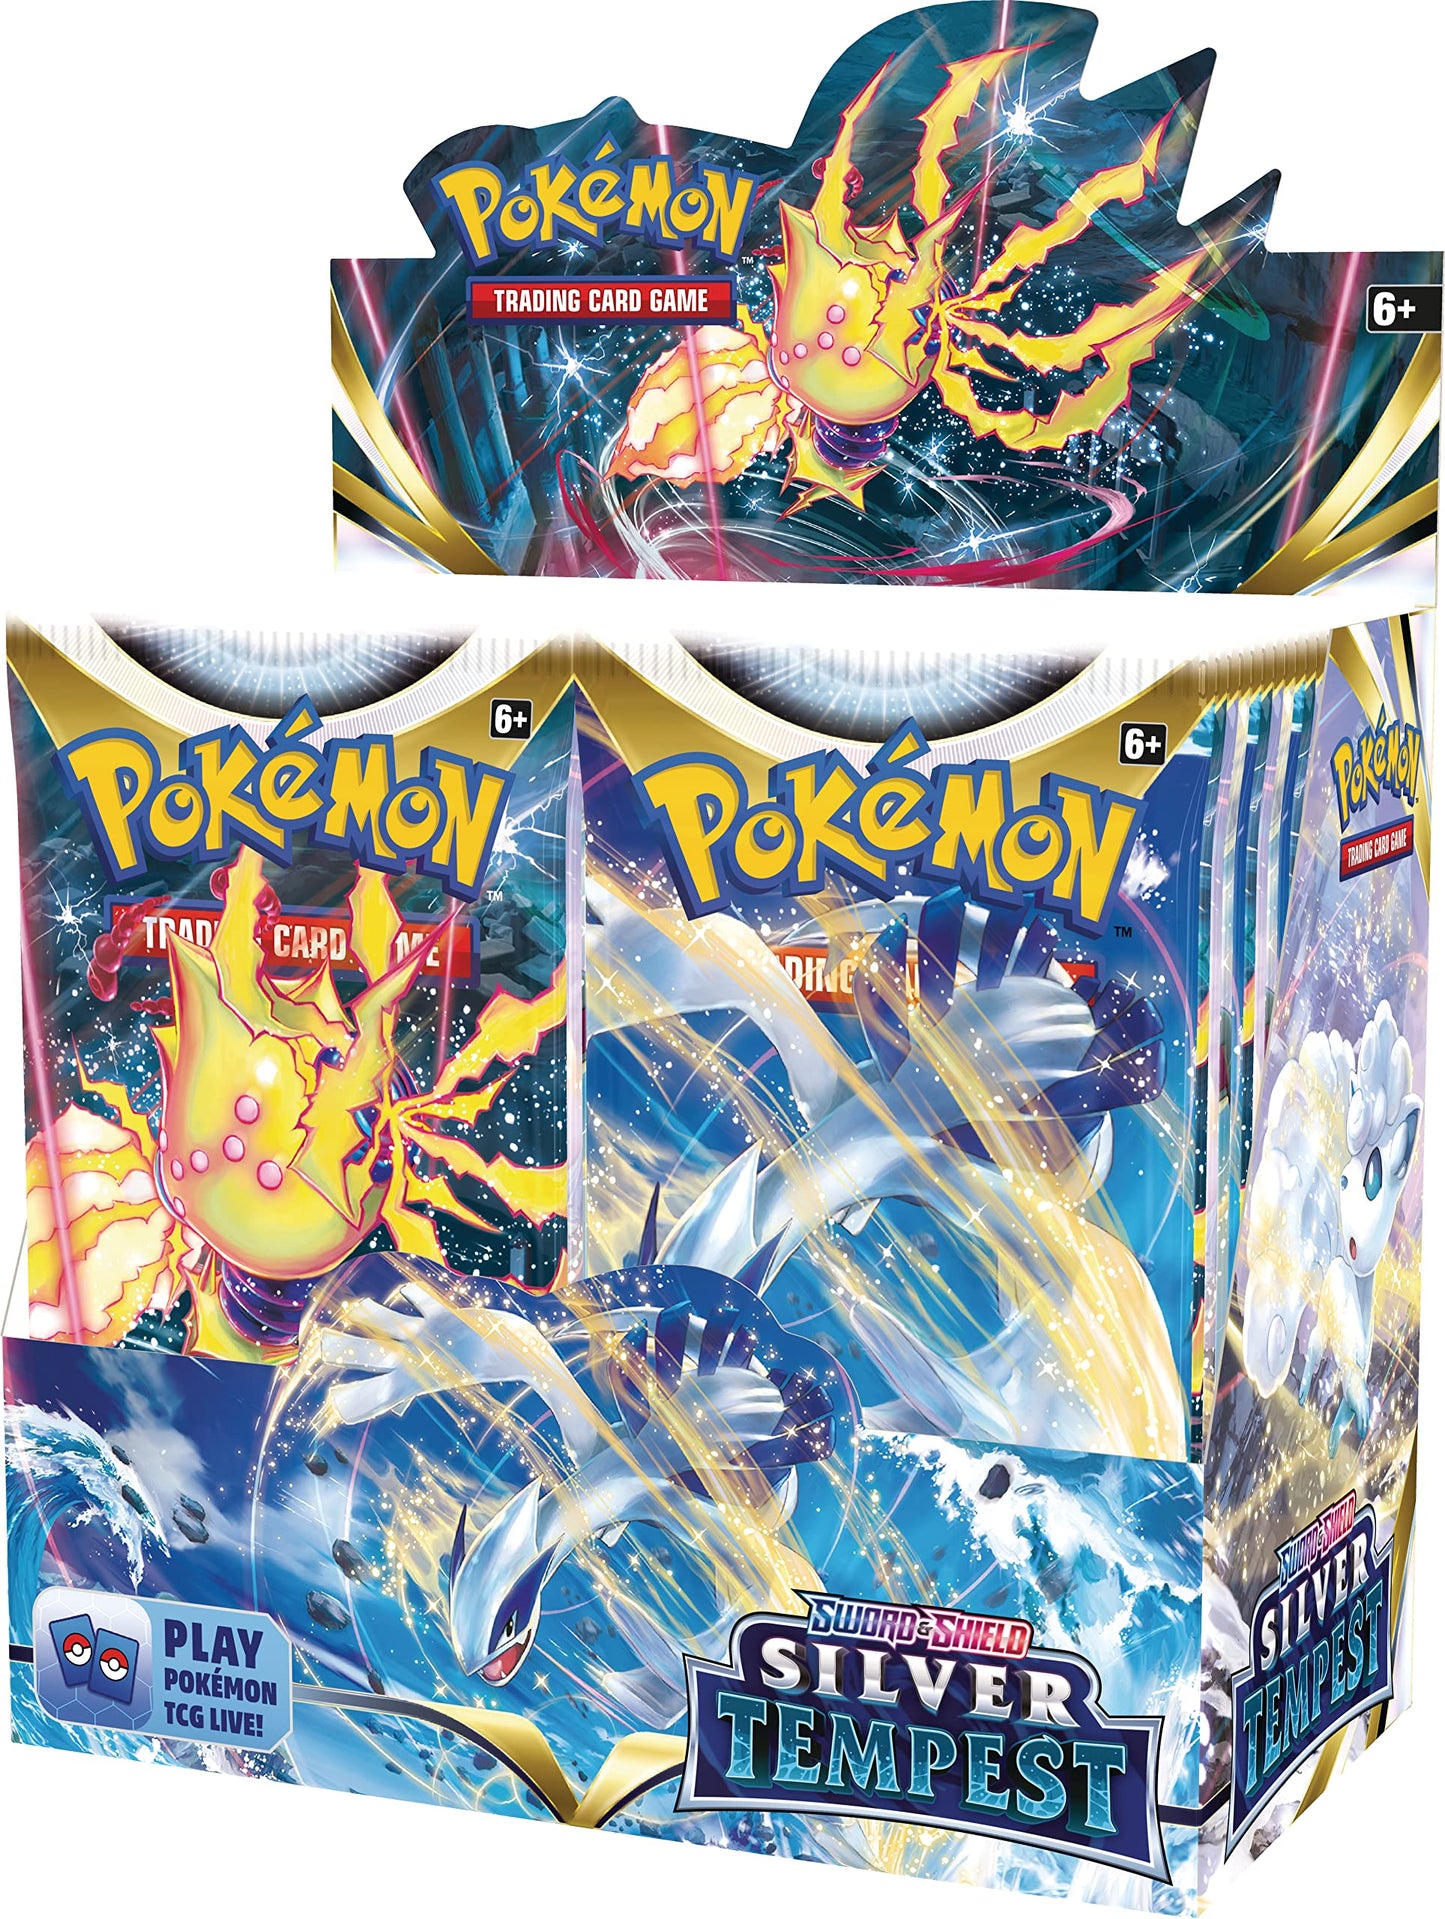 Pokémon Trading Card Game Silver Tempest Booster Pack